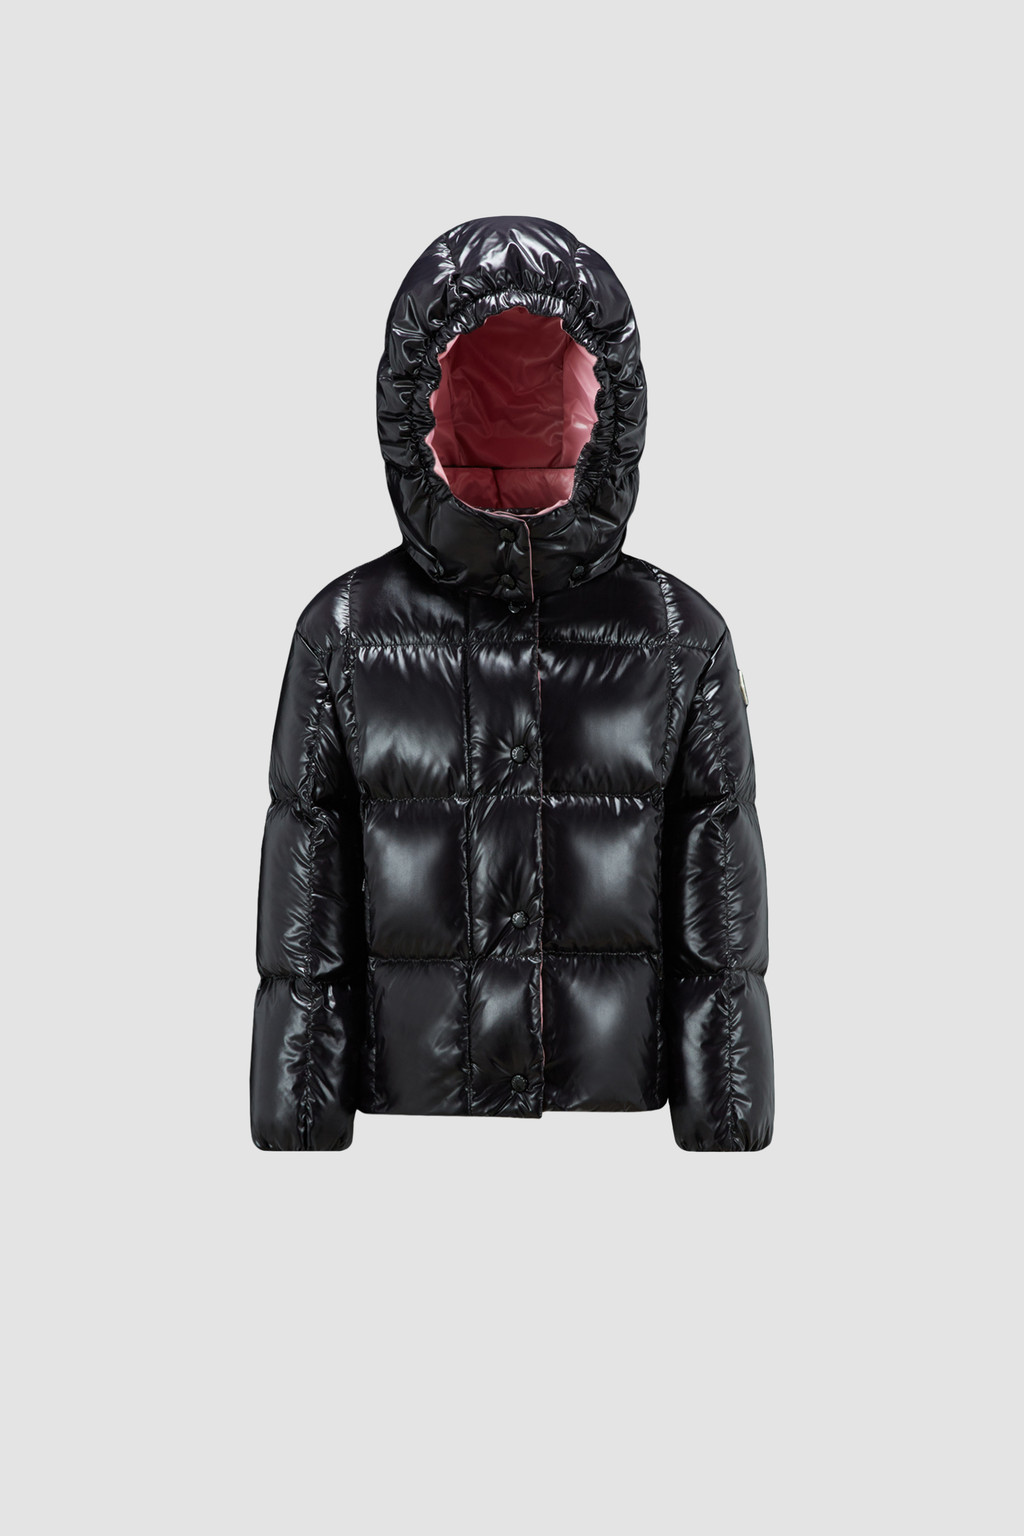 Icons for Children - New In | Moncler US